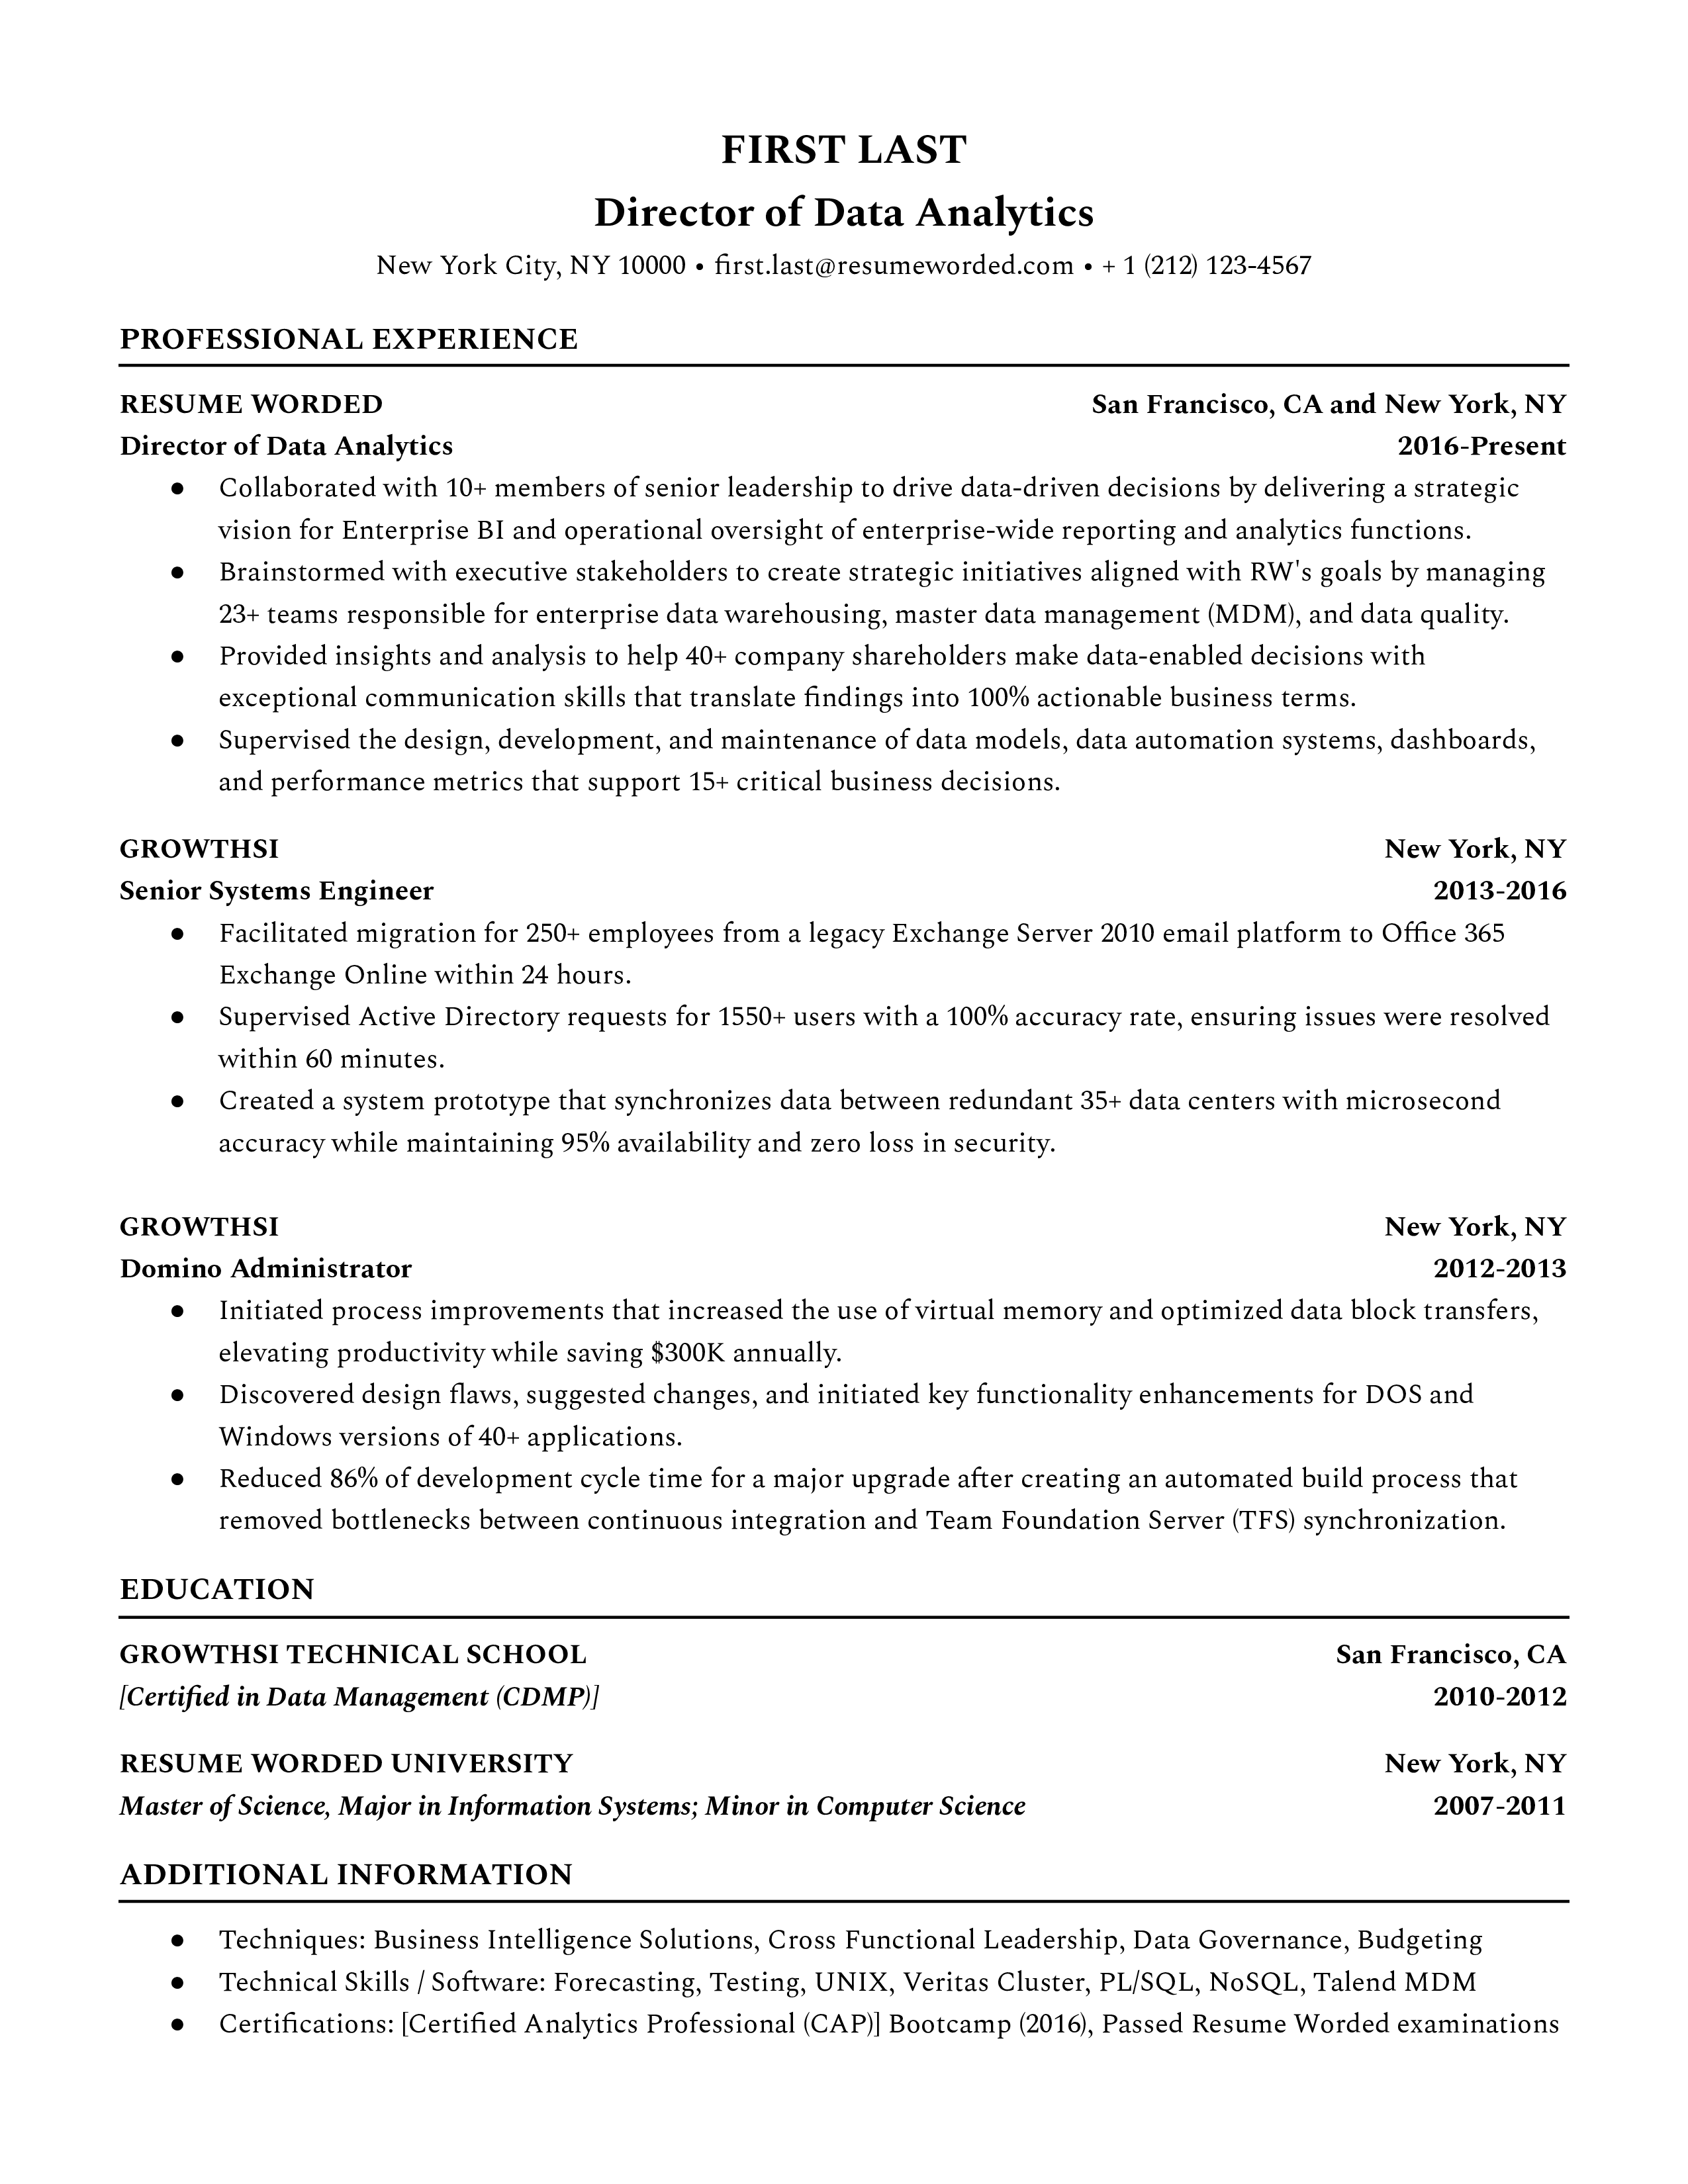 Director of Data Analytics resume showcasing technical expertise and leadership experience.